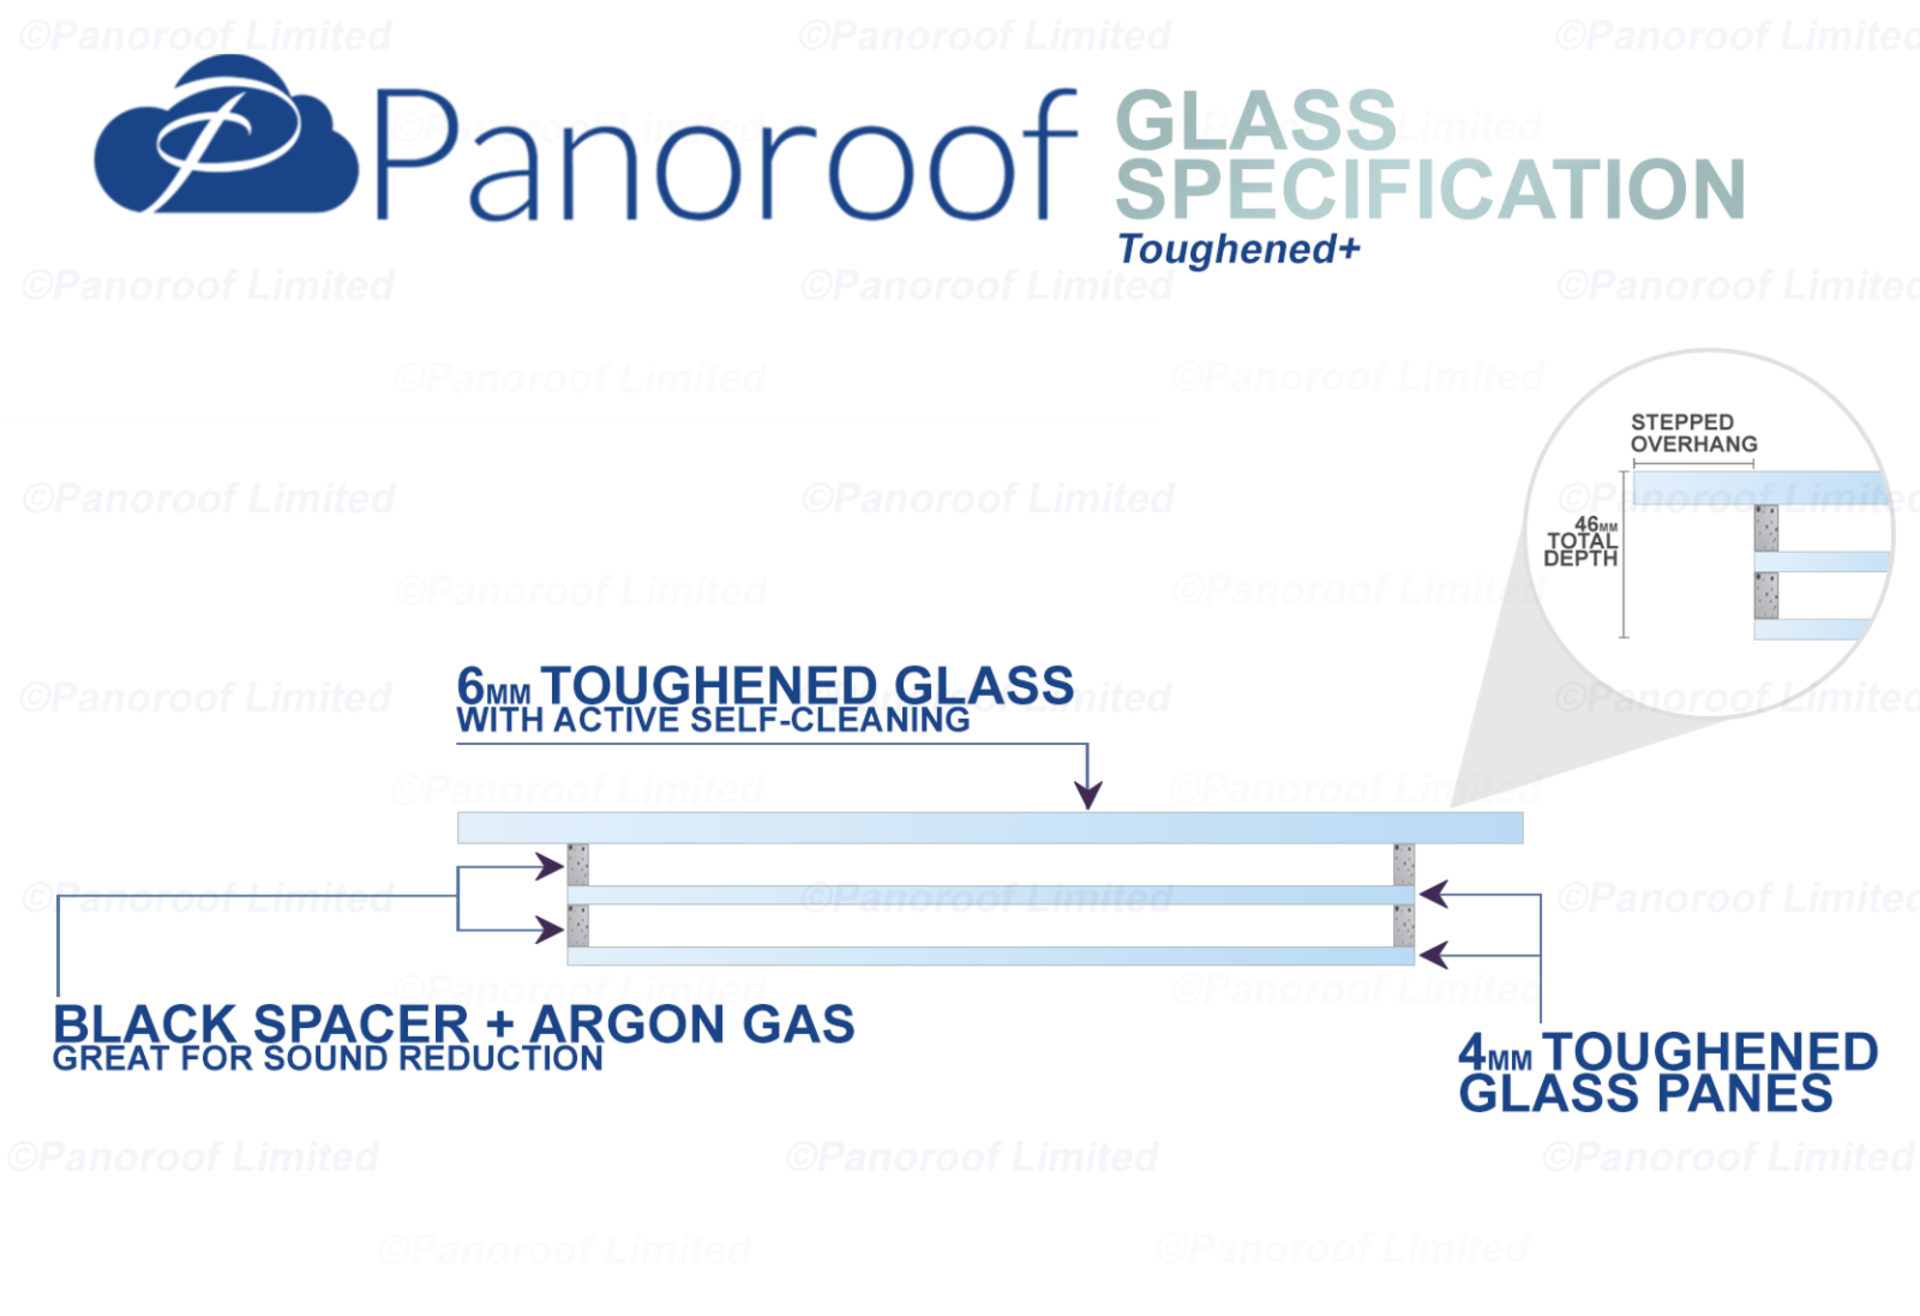 """Panoroof Triple Glazed Self Cleaning 600x900mm (inside Size Visable glass area) Seamless Glass - Image 5 of 6